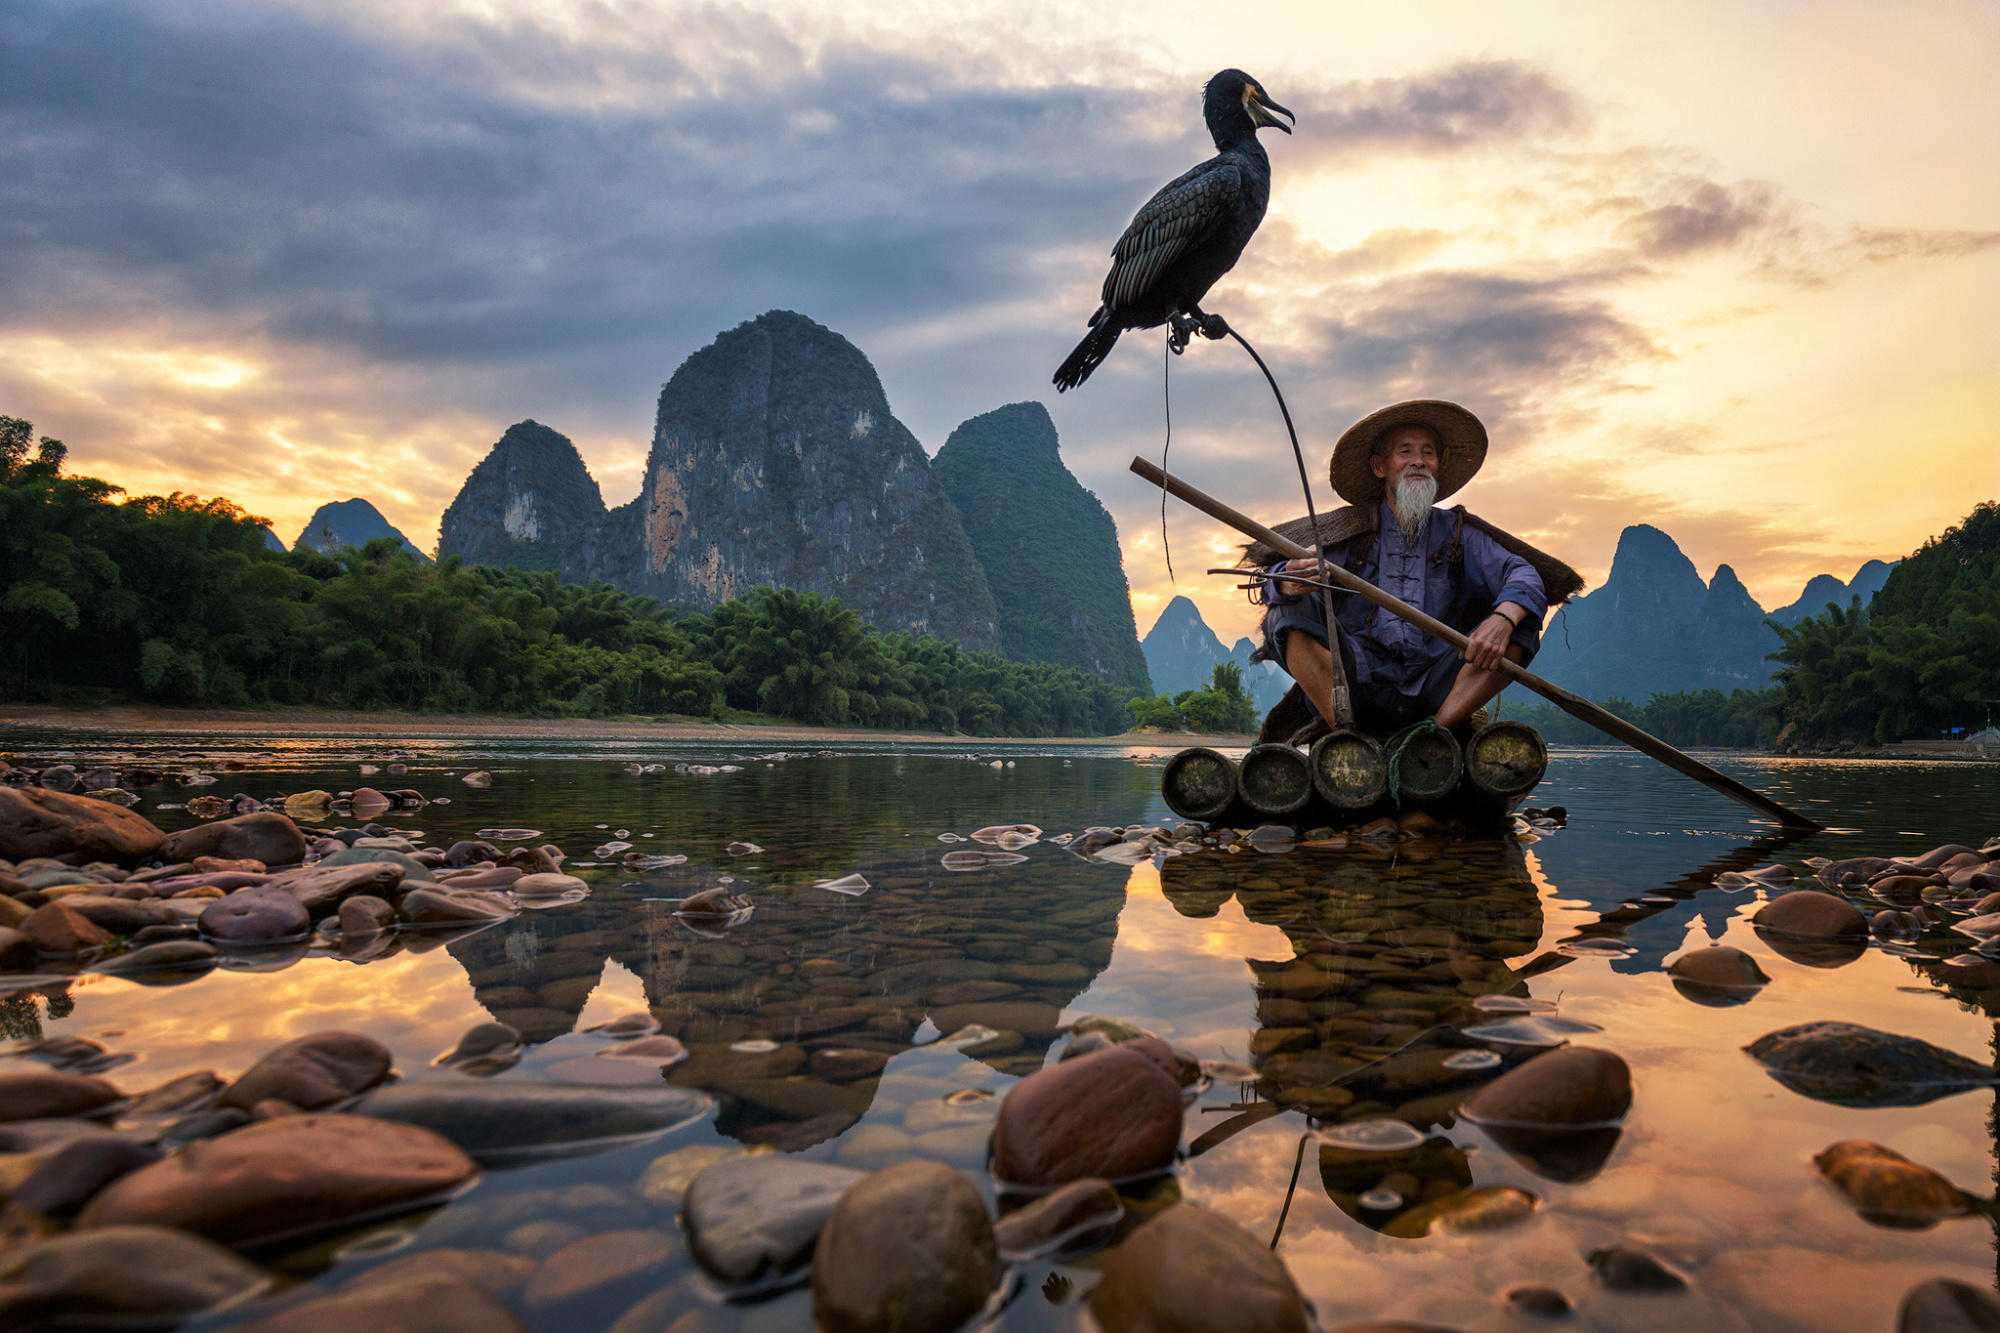 20 Stunning Travel Photos to Inspire the Wanderlust in You